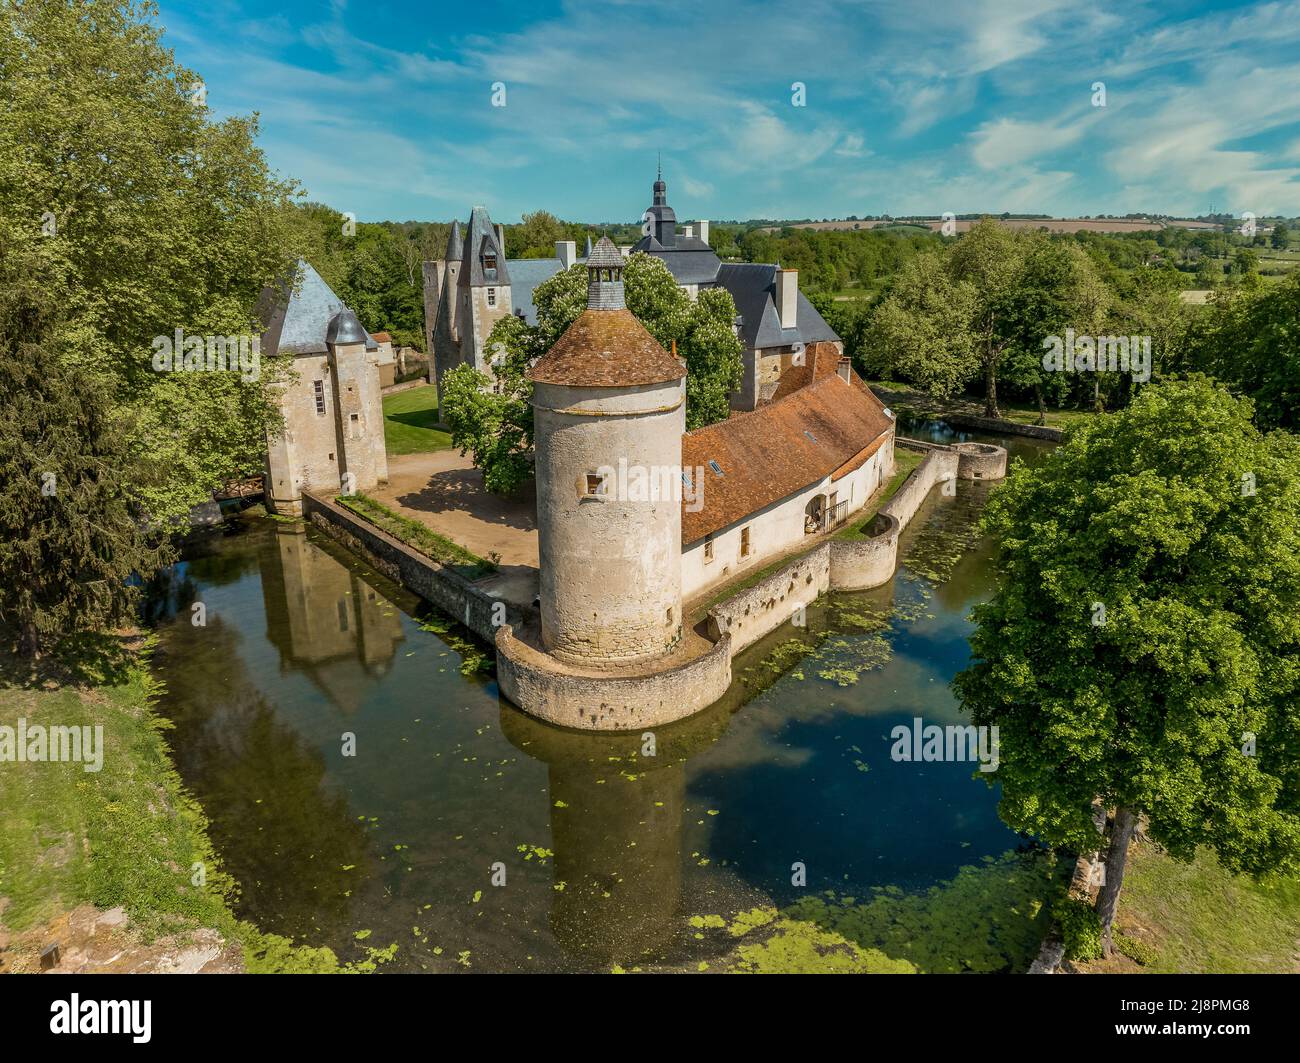 Aerial view of historic monument Bannegon castle in France on the border between Berry and Bourbonnais, with imposing keep, drawbridge, and a trapezoi Stock Photo